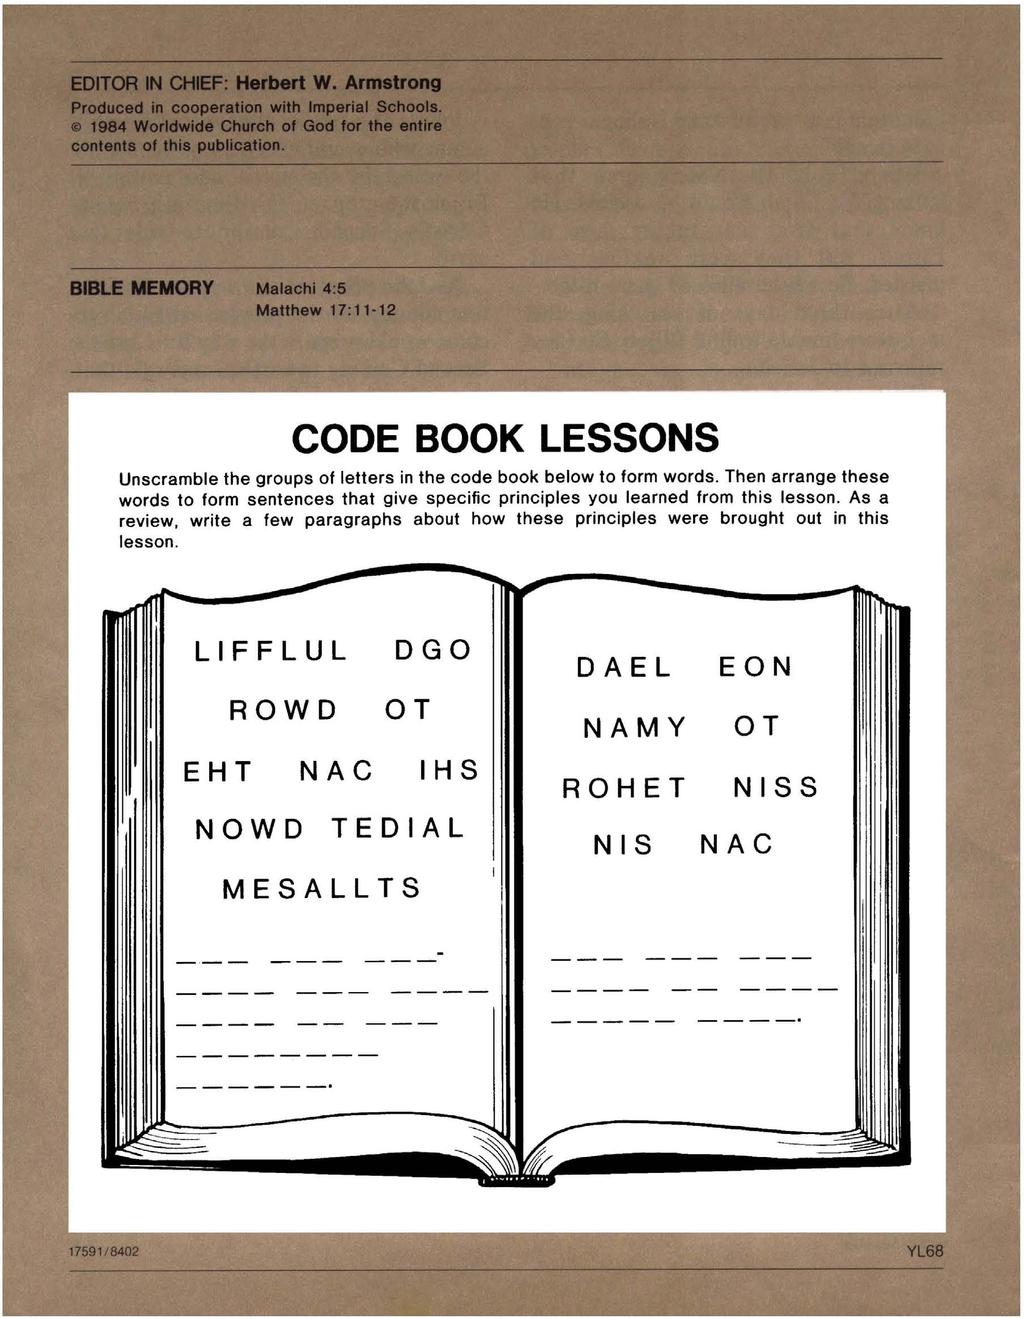 CODE BOOK LESSONS Unscramble the groups of letters in the code book below to form words.